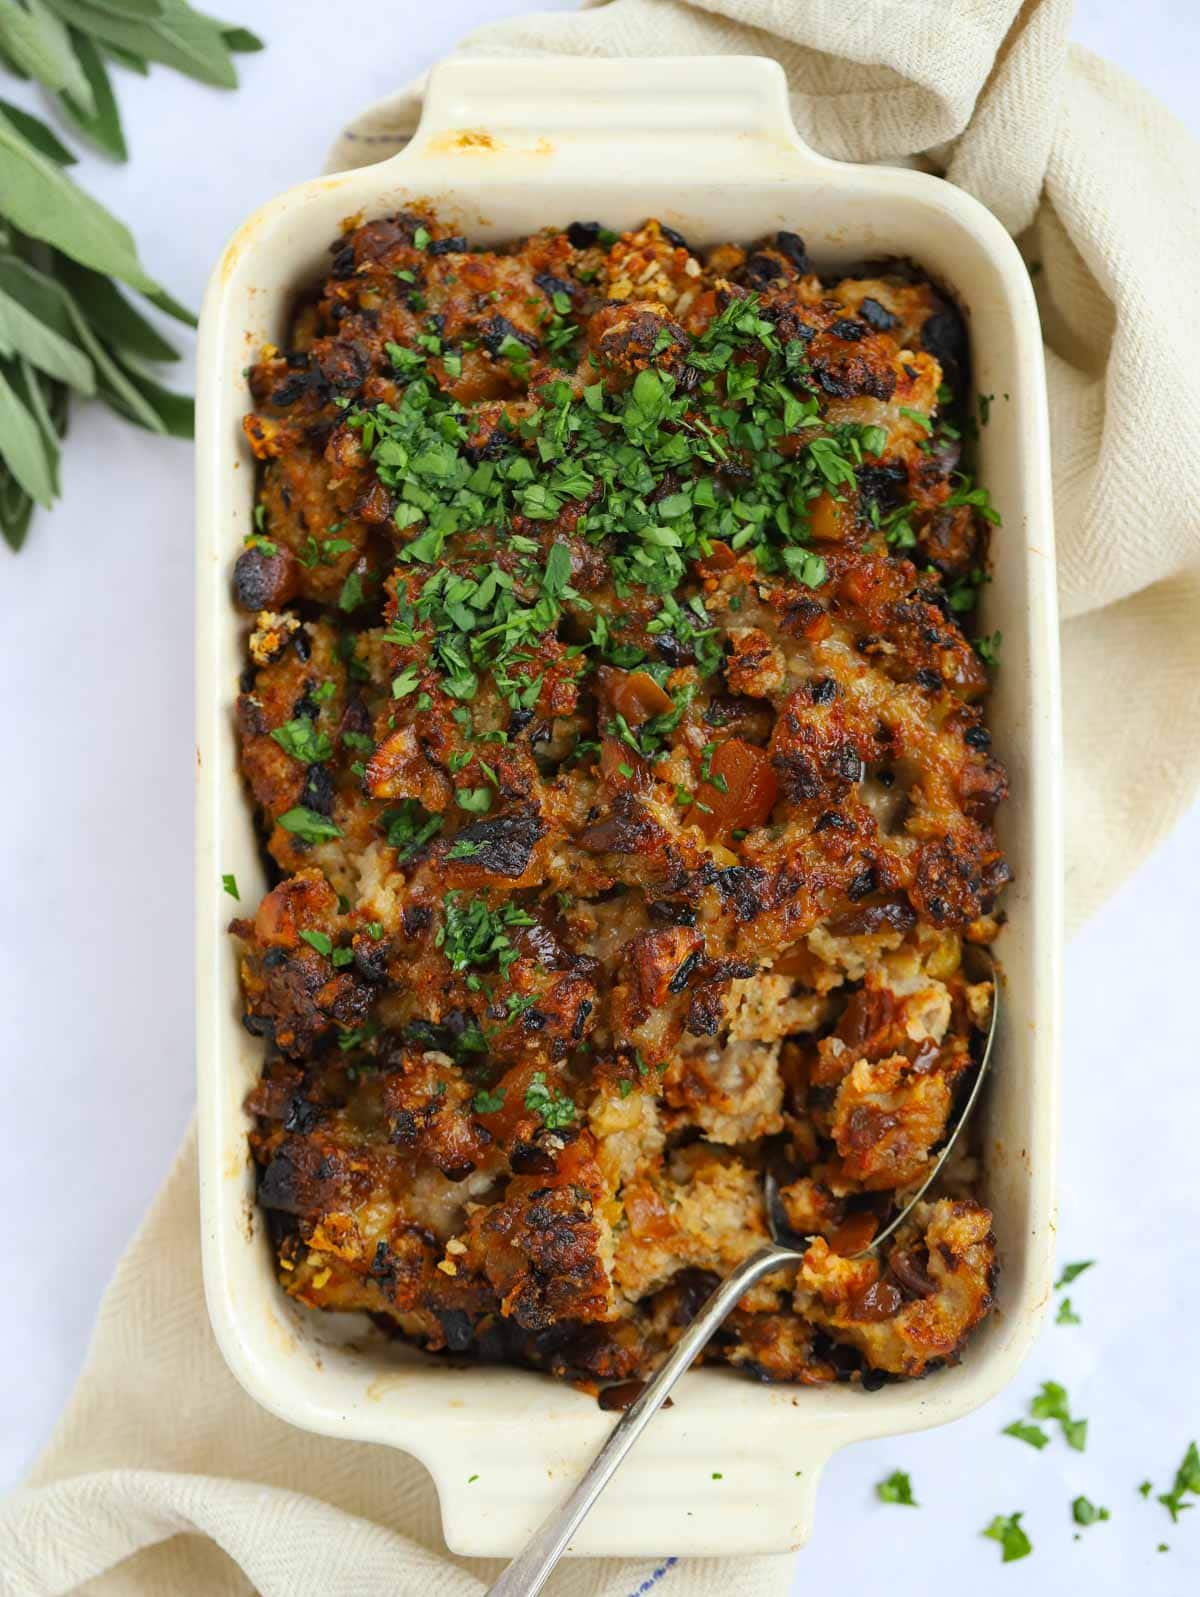 Sausage stuffing recipe for the best ever homemade stuffing